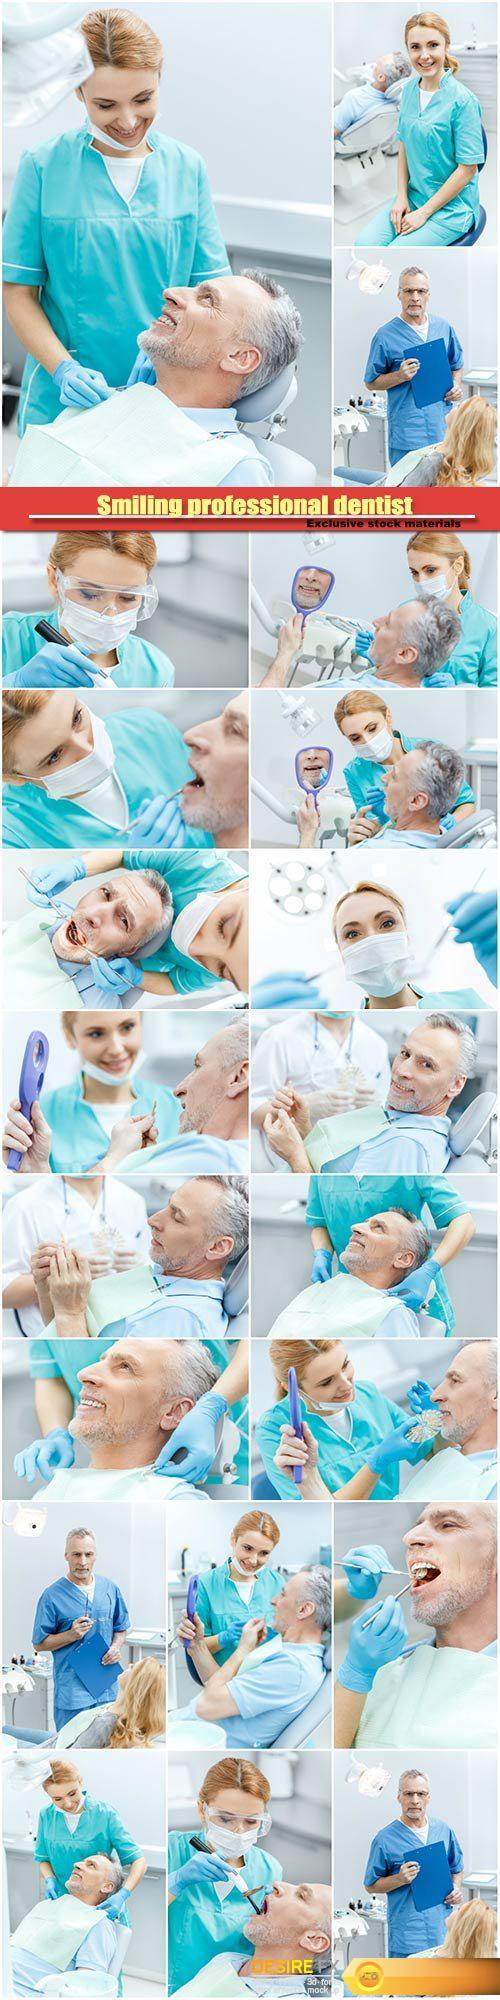 Smiling professional dentist looking at patient